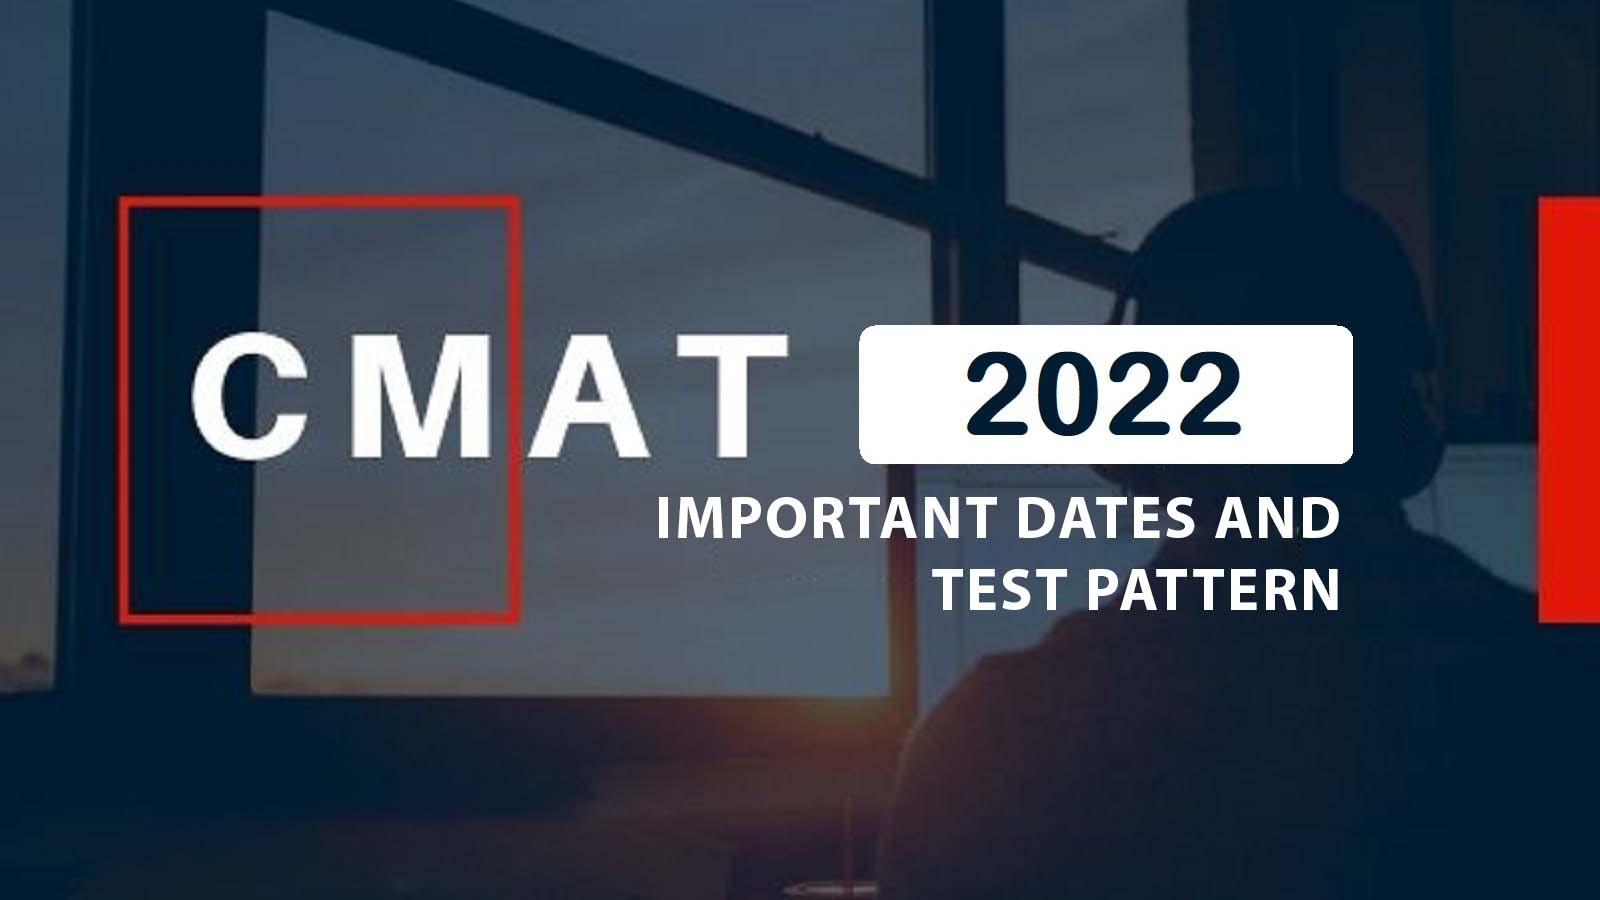 CMAT Exam 2022: Important Dates and Test Pattern